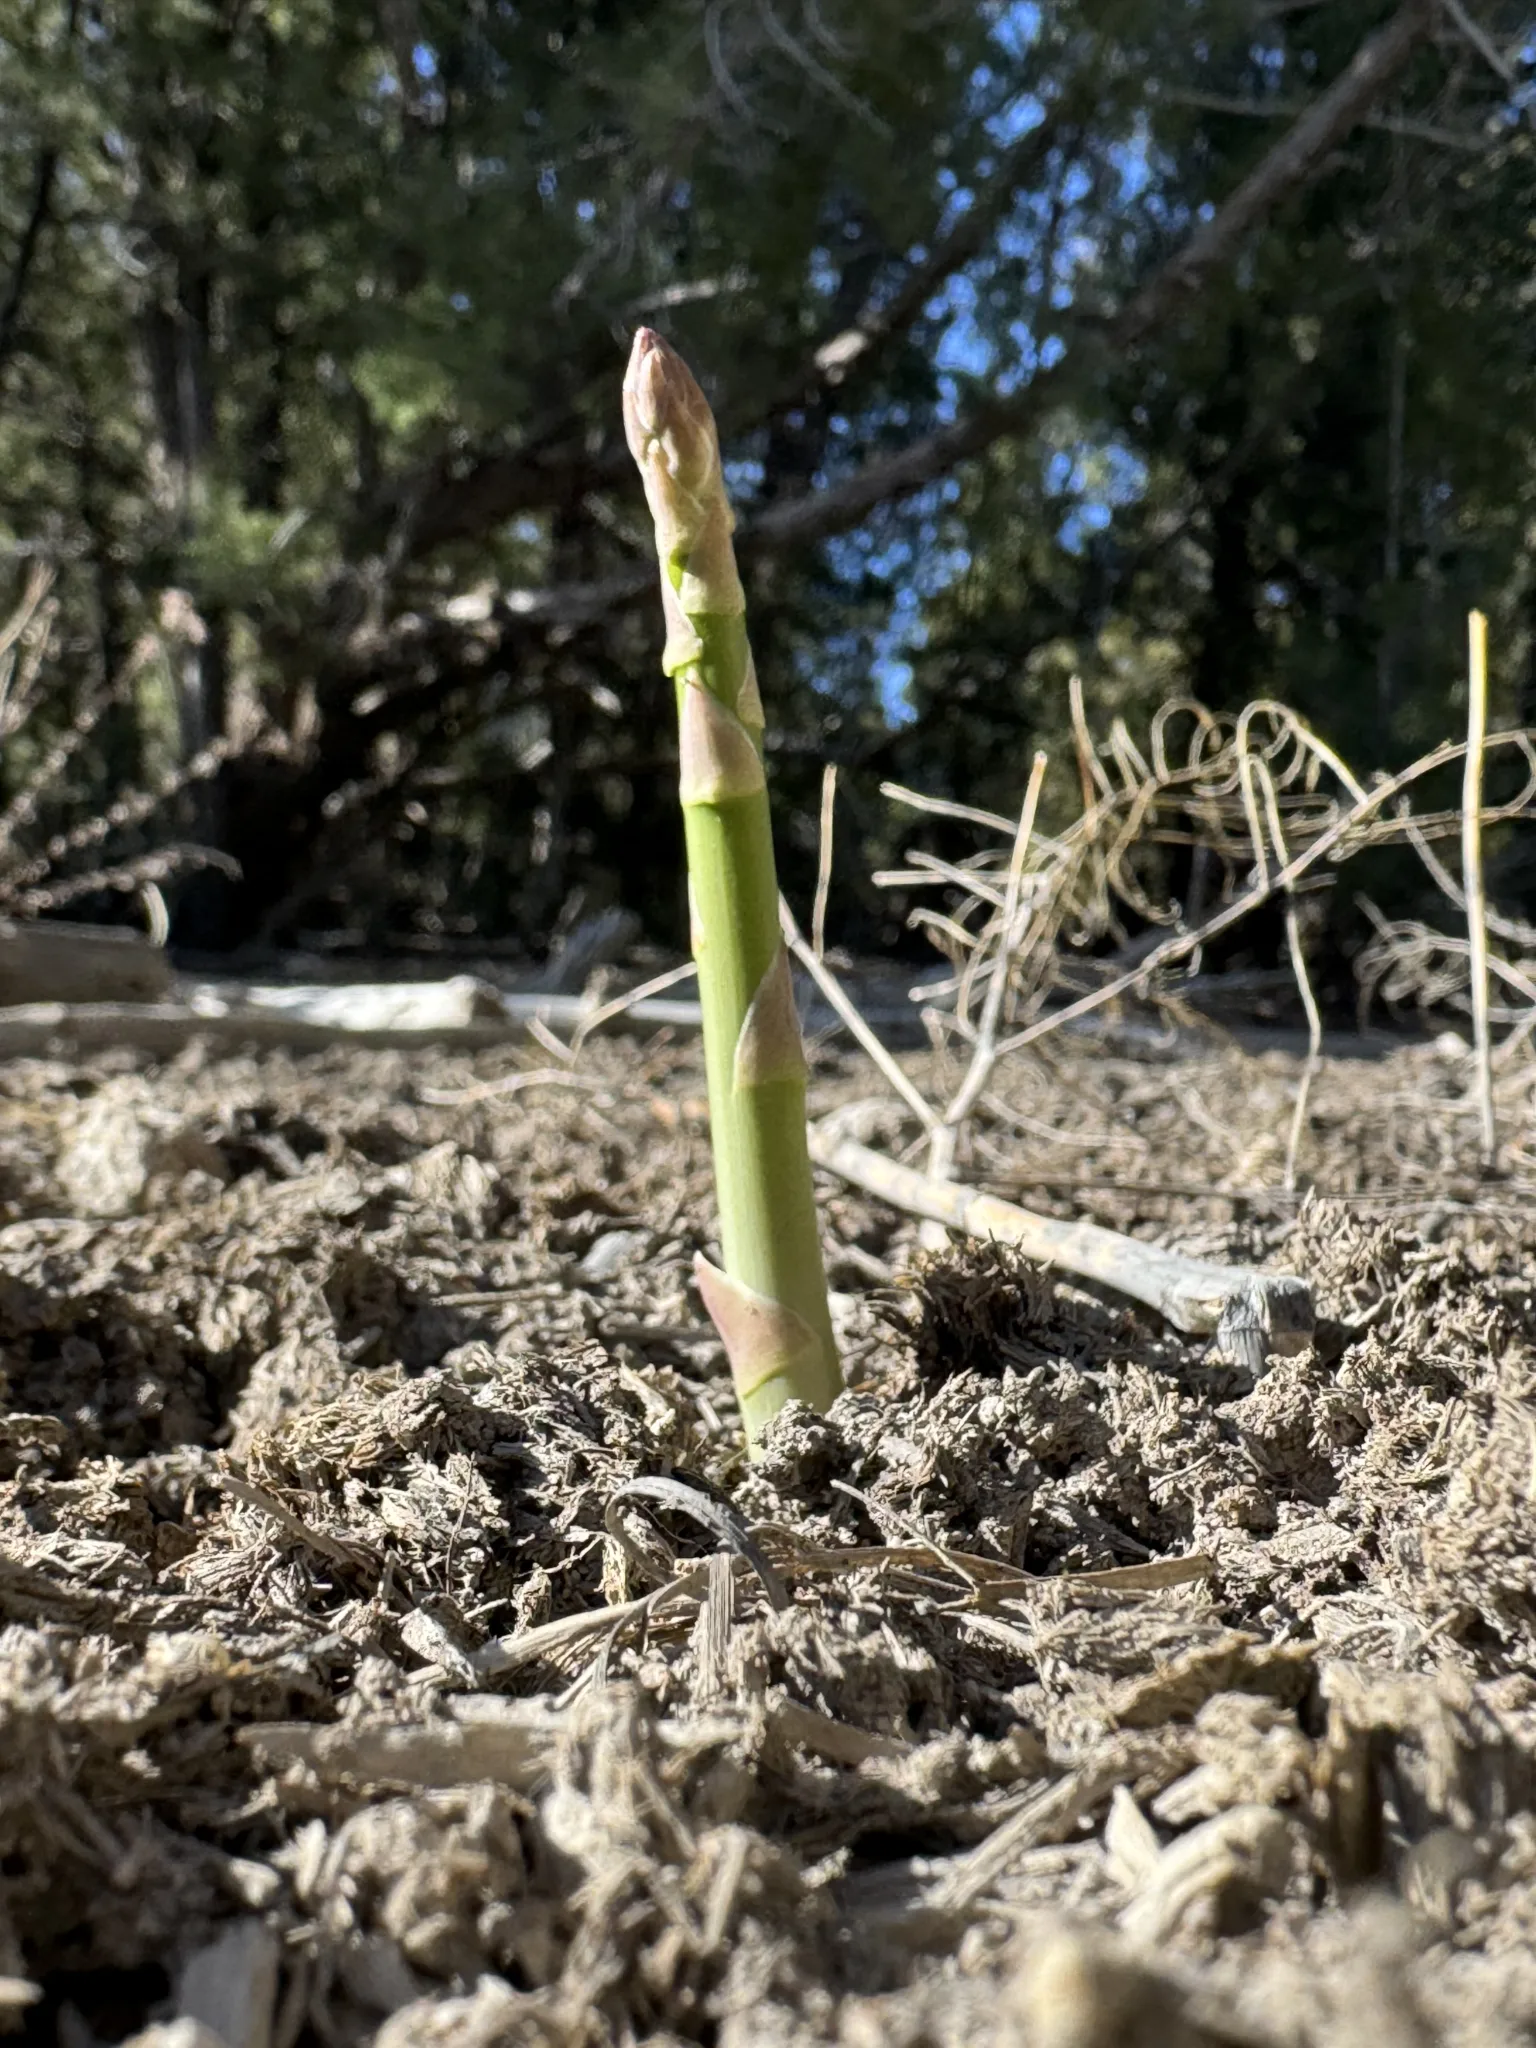 Planting Strawberries and Asparagus in Southwest Colorado’s Unique Soil